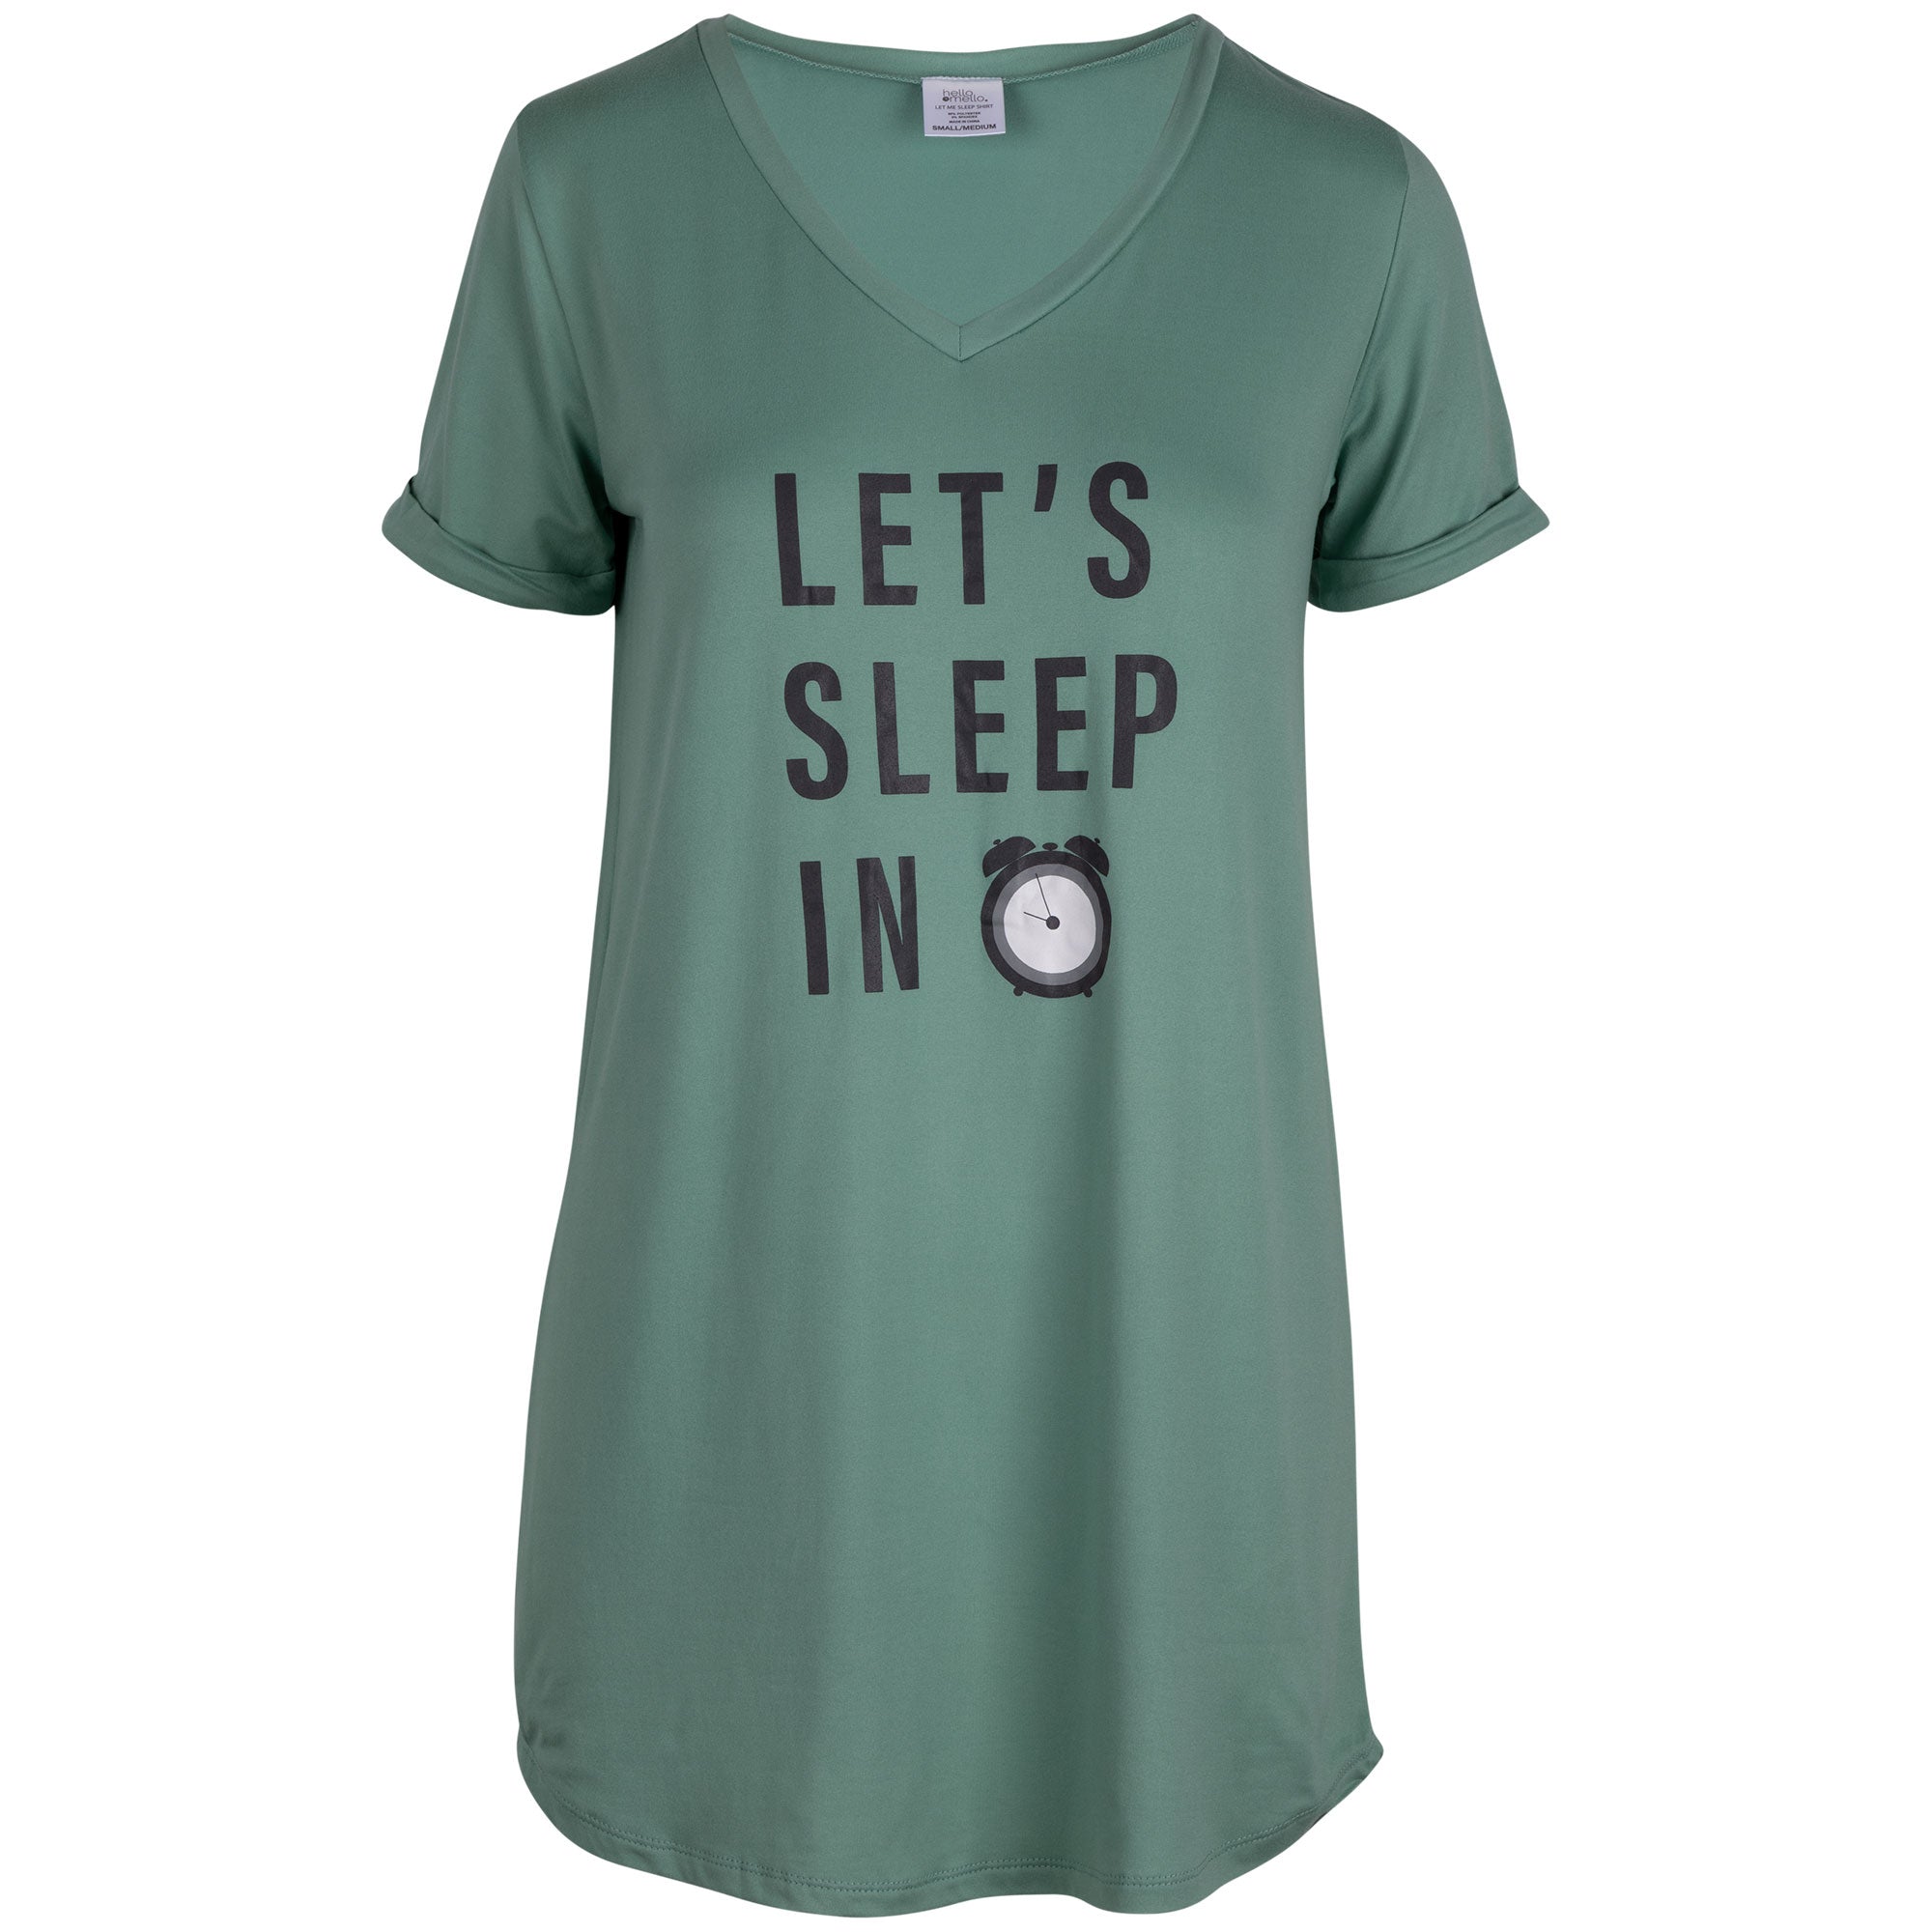 Say It Out Loud Nightgown - Let's Sleep In - S/M